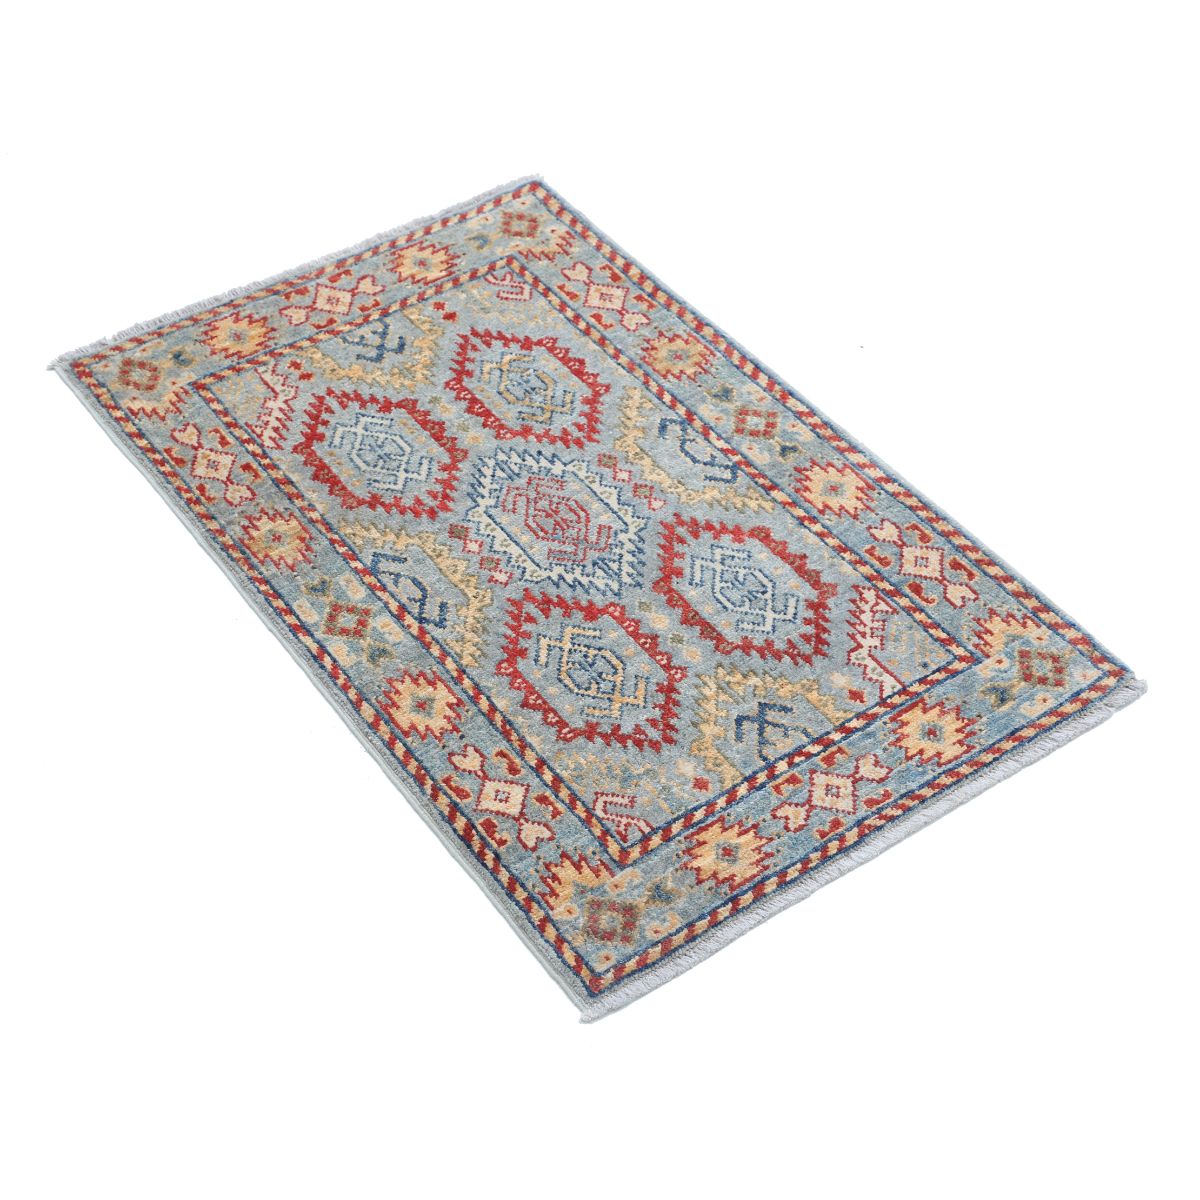 Revival 2' 0" X 3' 1" Wool Hand Knotted Rug